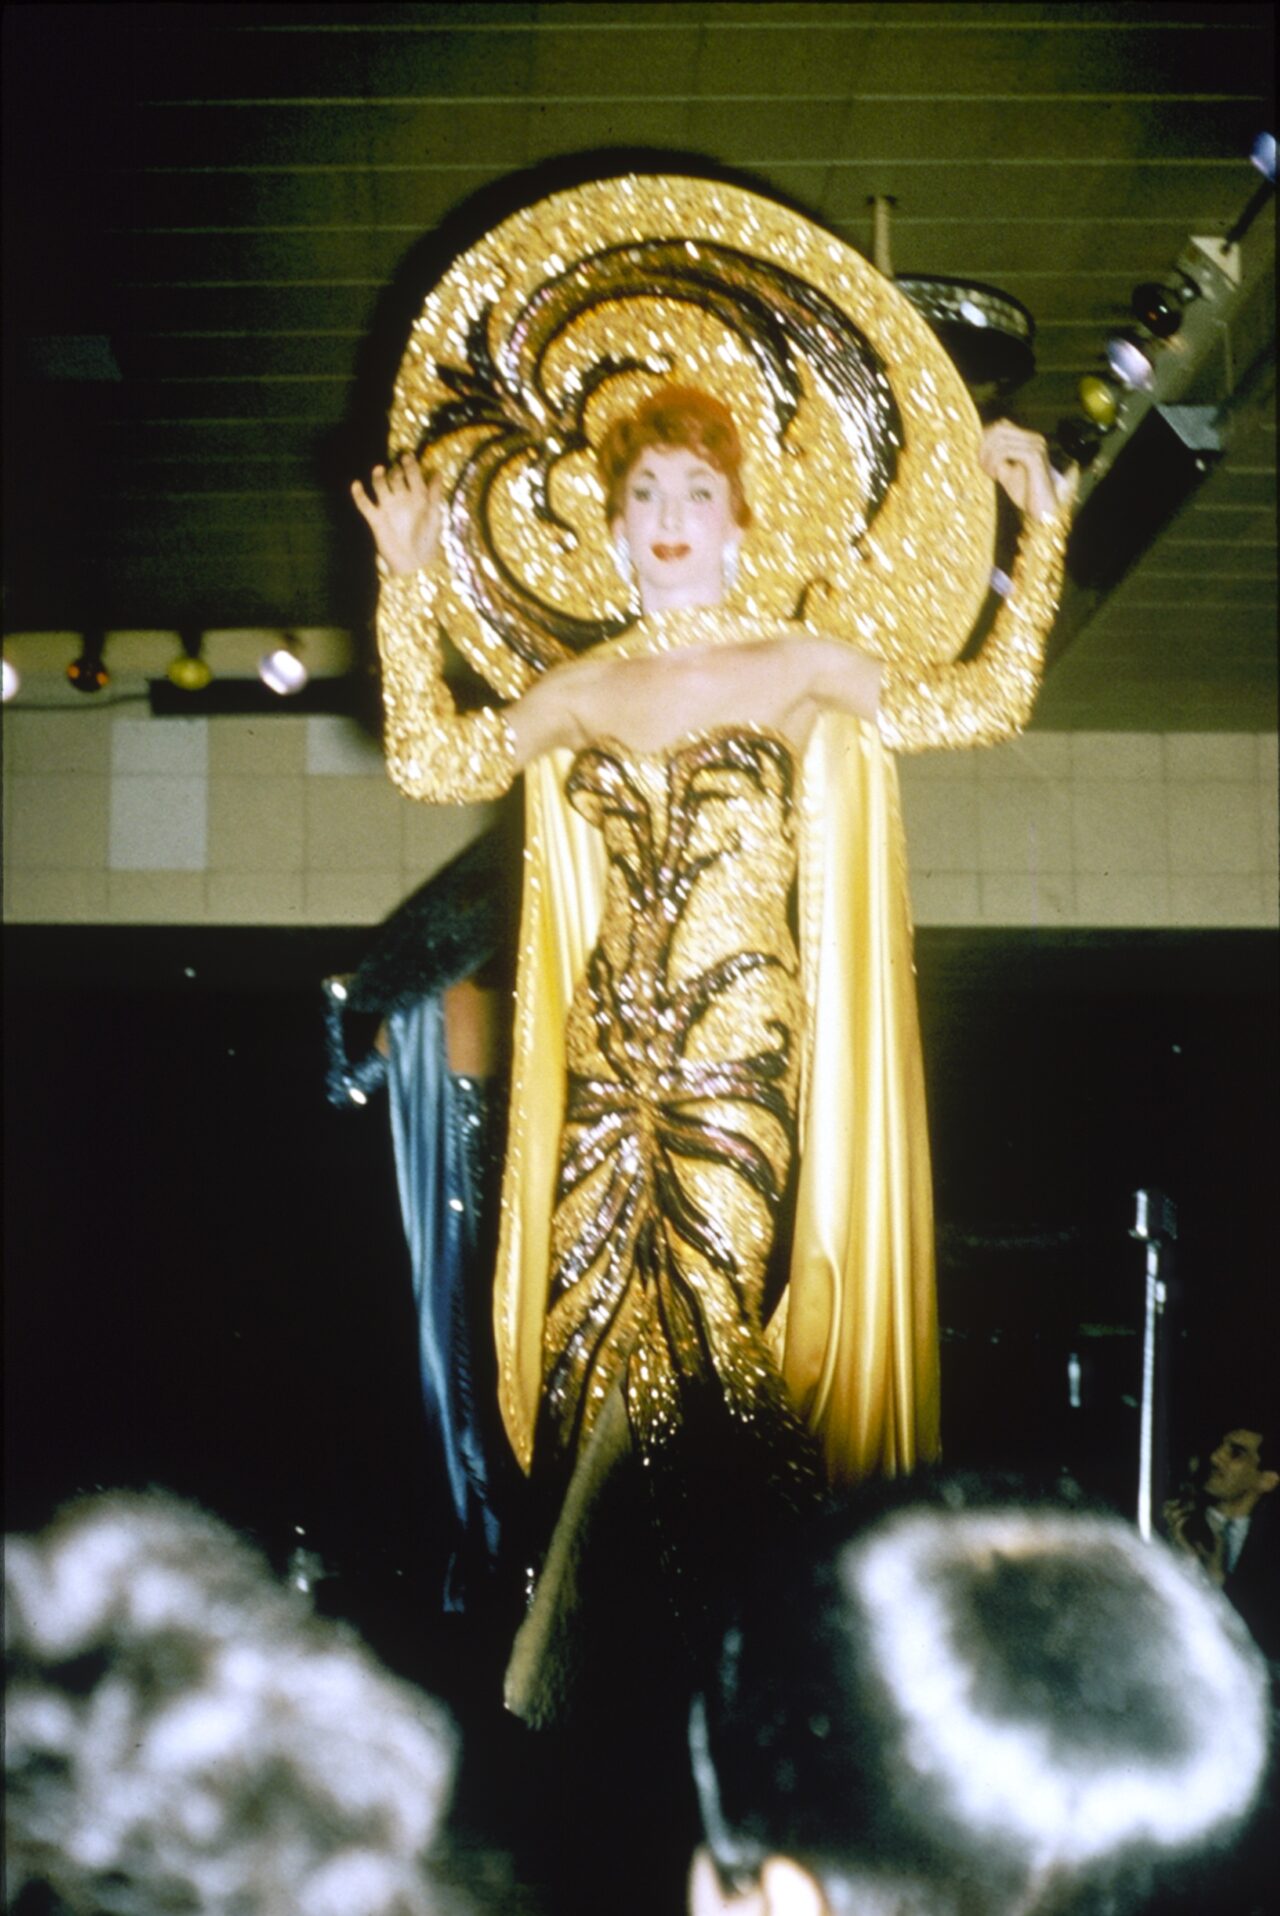 Jewel Box Revue drag show at Robert's Show Lounge. Female impersonator in yellow and black gown with a large yellow and black hat, on stage.